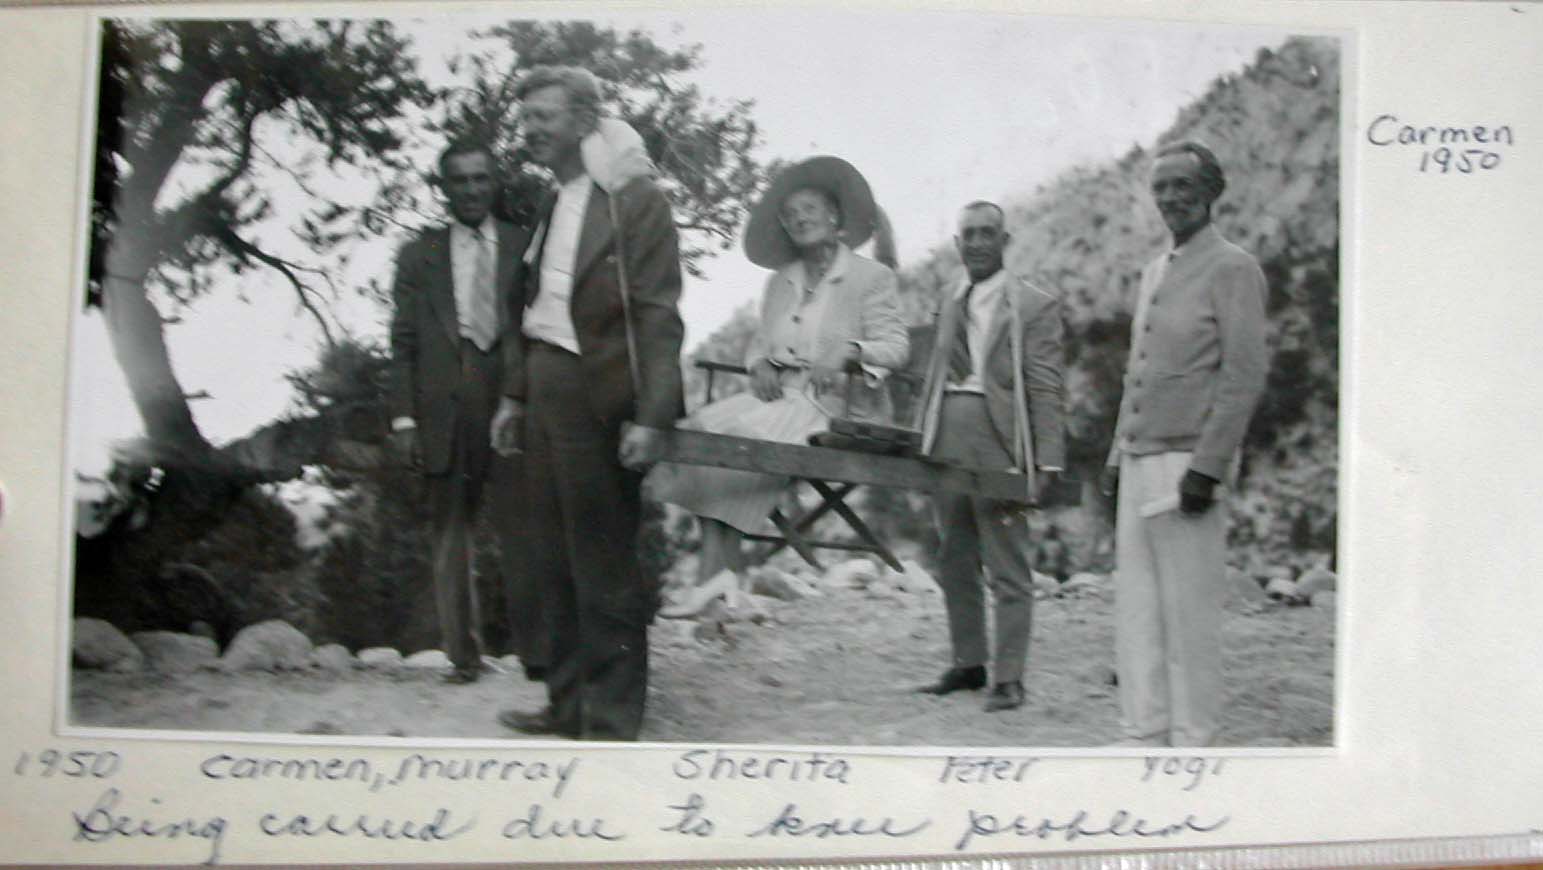 1950 Convention - Sherifa on litter*